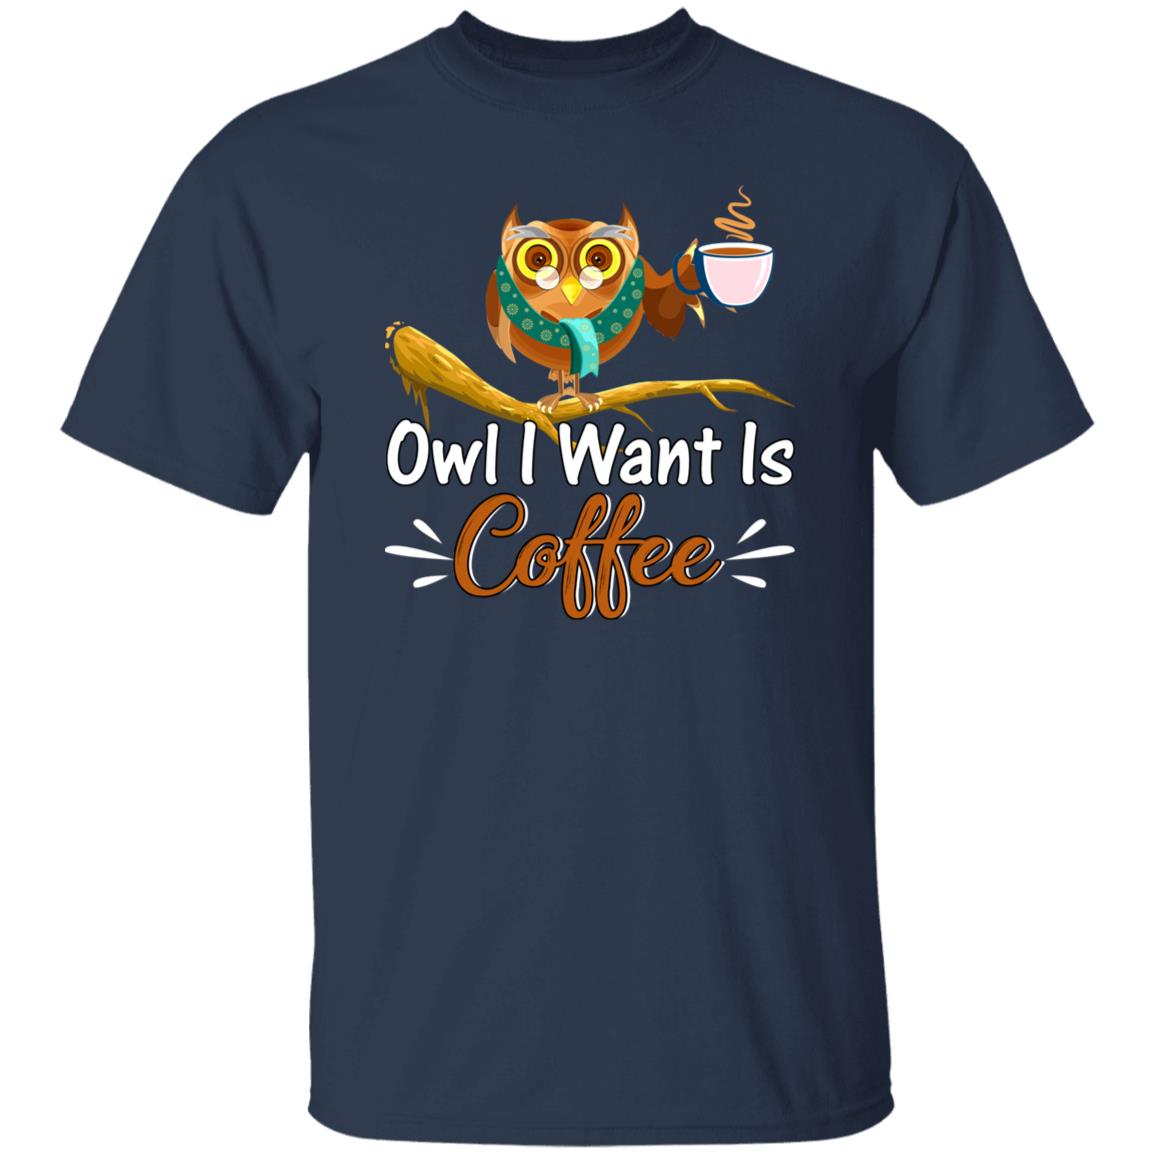 Owl I want is coffee Unisex shirt gift barista coffee lover tee black navy dark heather-Navy-Family-Gift-Planet